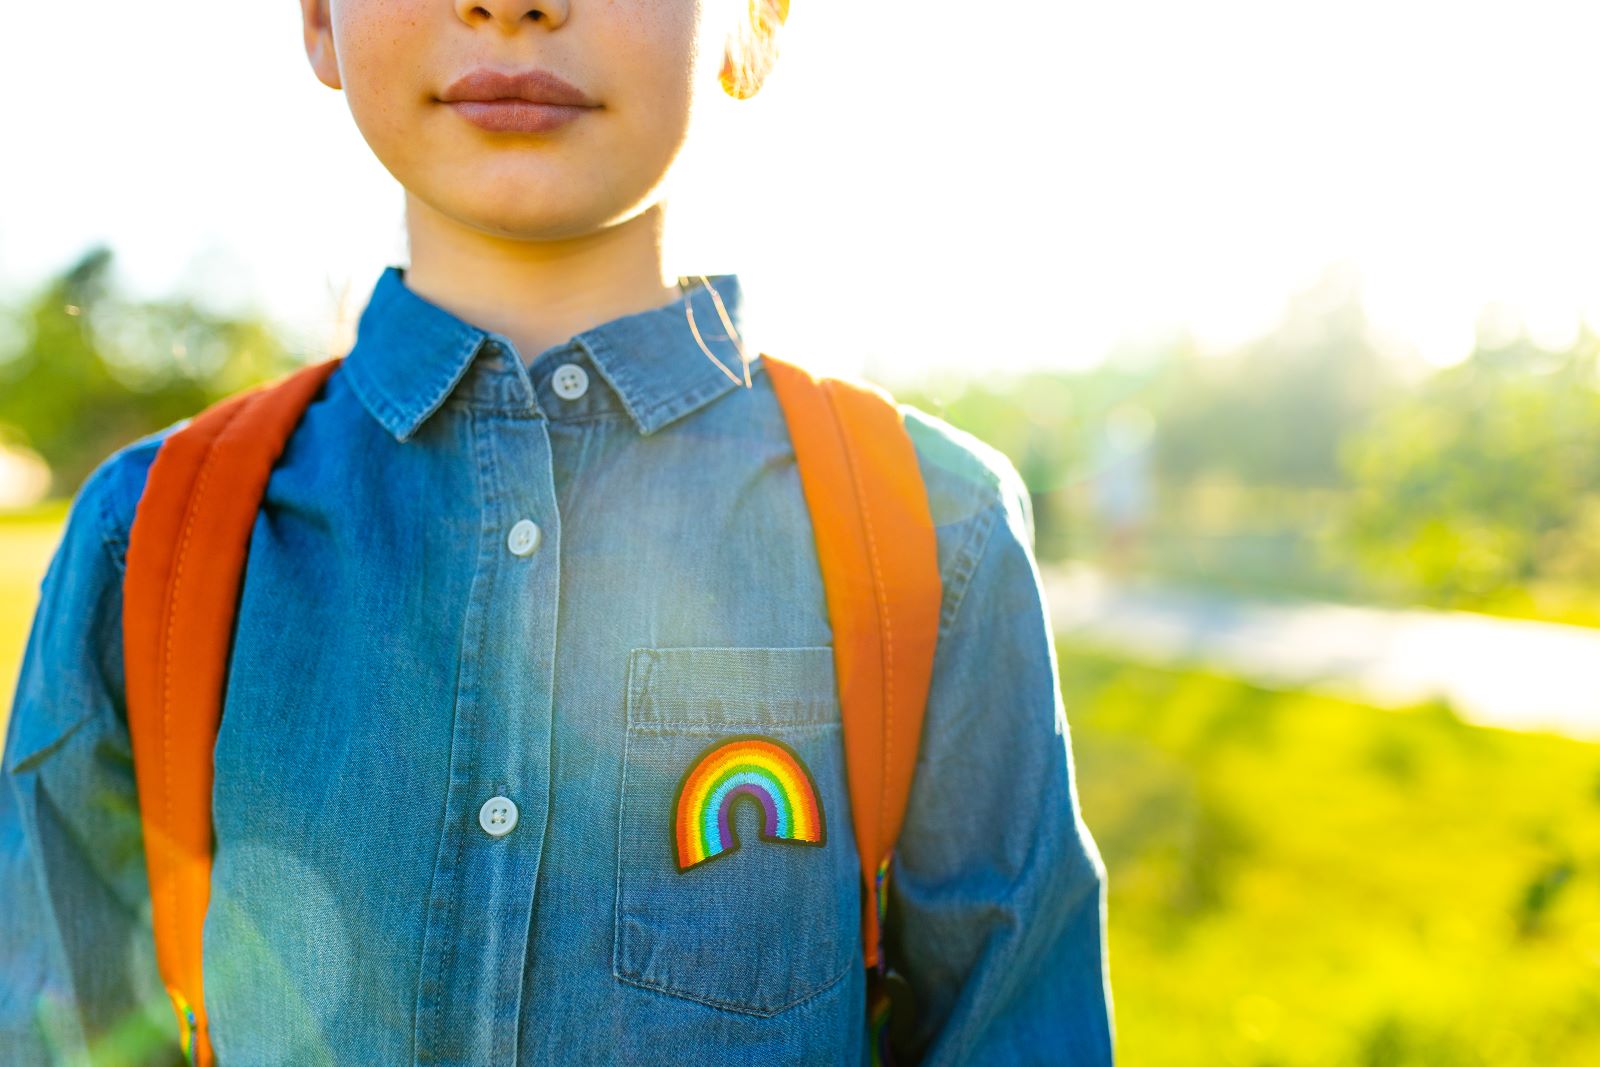 child in denim t-shirt with rainbow symbol, wearing an orange backpack outdoor, standing outside